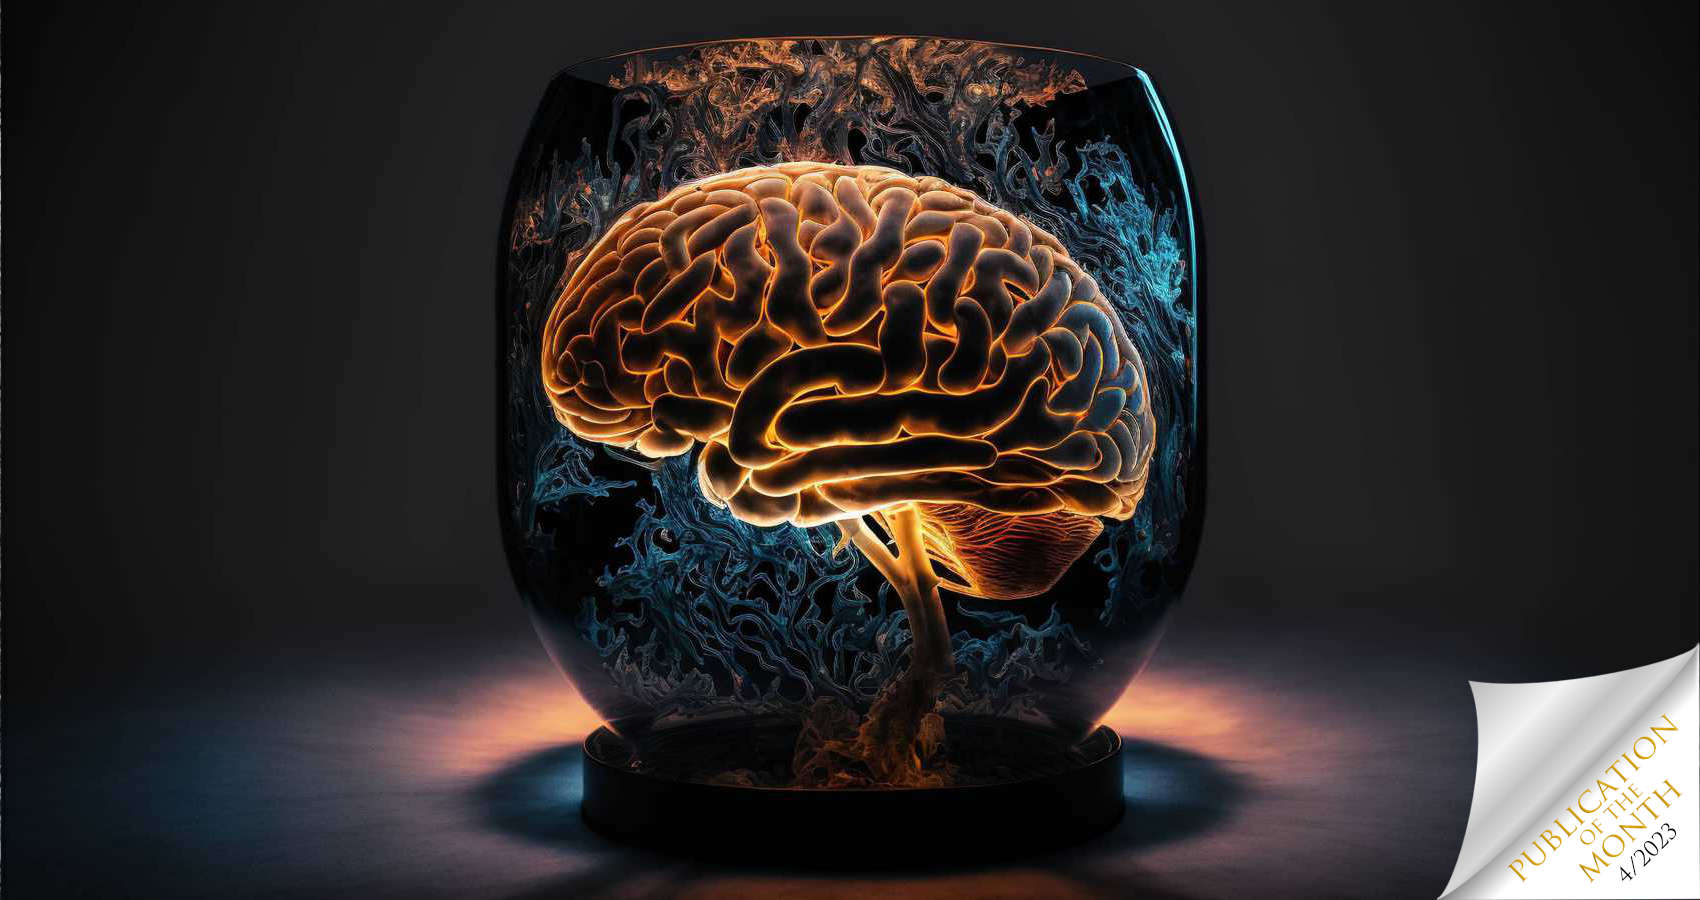 Brain in a Jar, flash fiction by Anthony Doyle at Spillwords.com